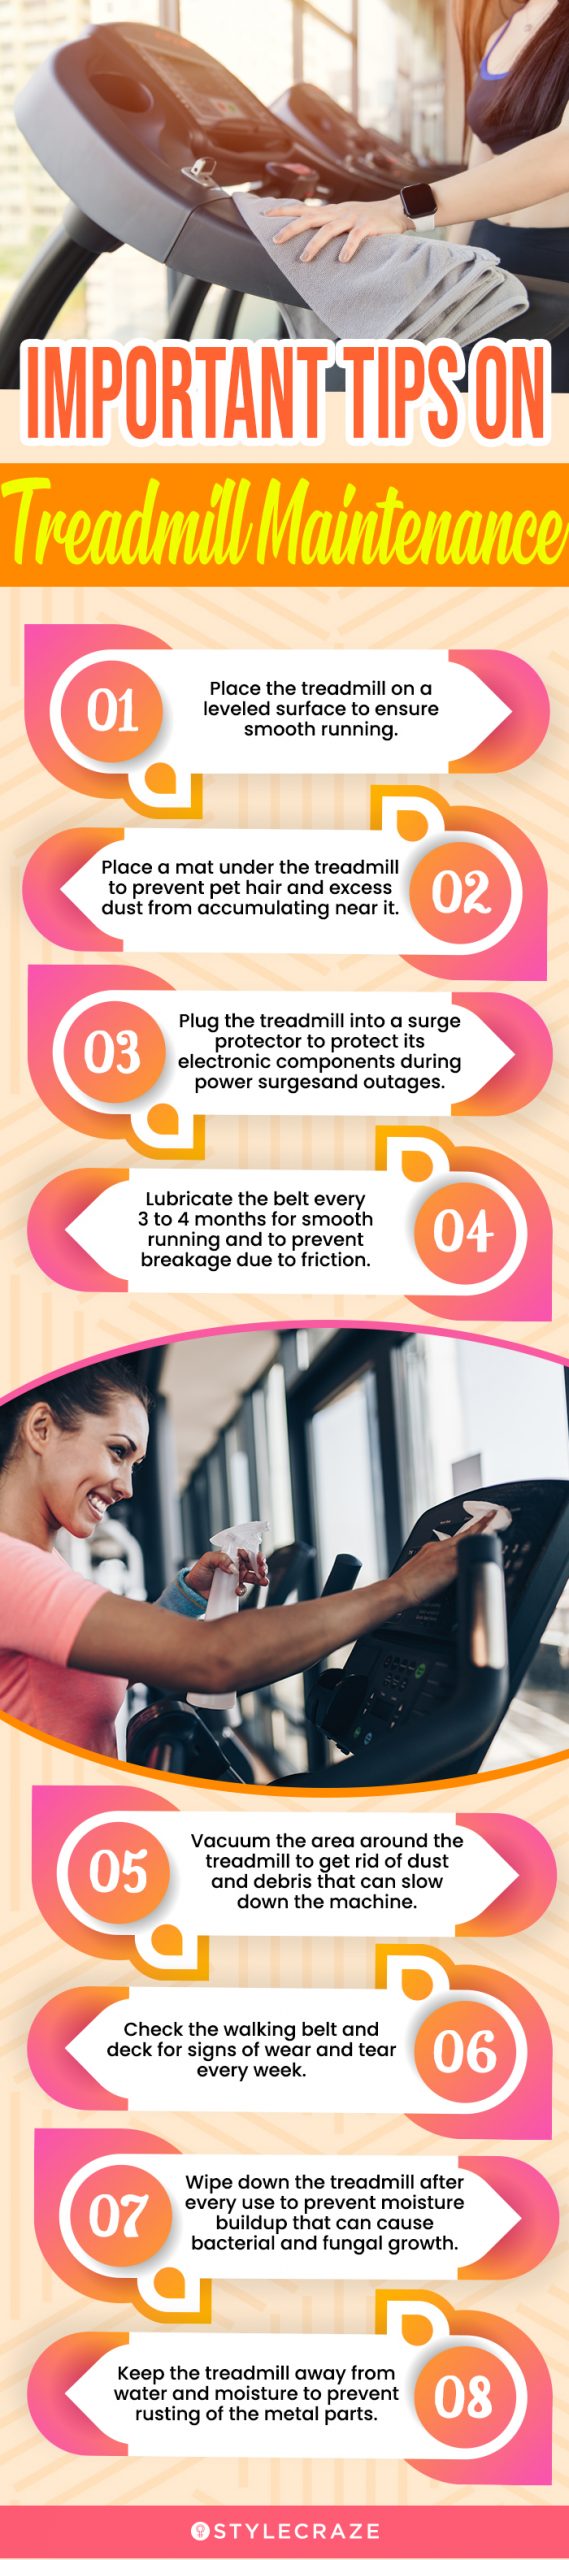 Important Tips On Treadmill Maintenance (infographic)